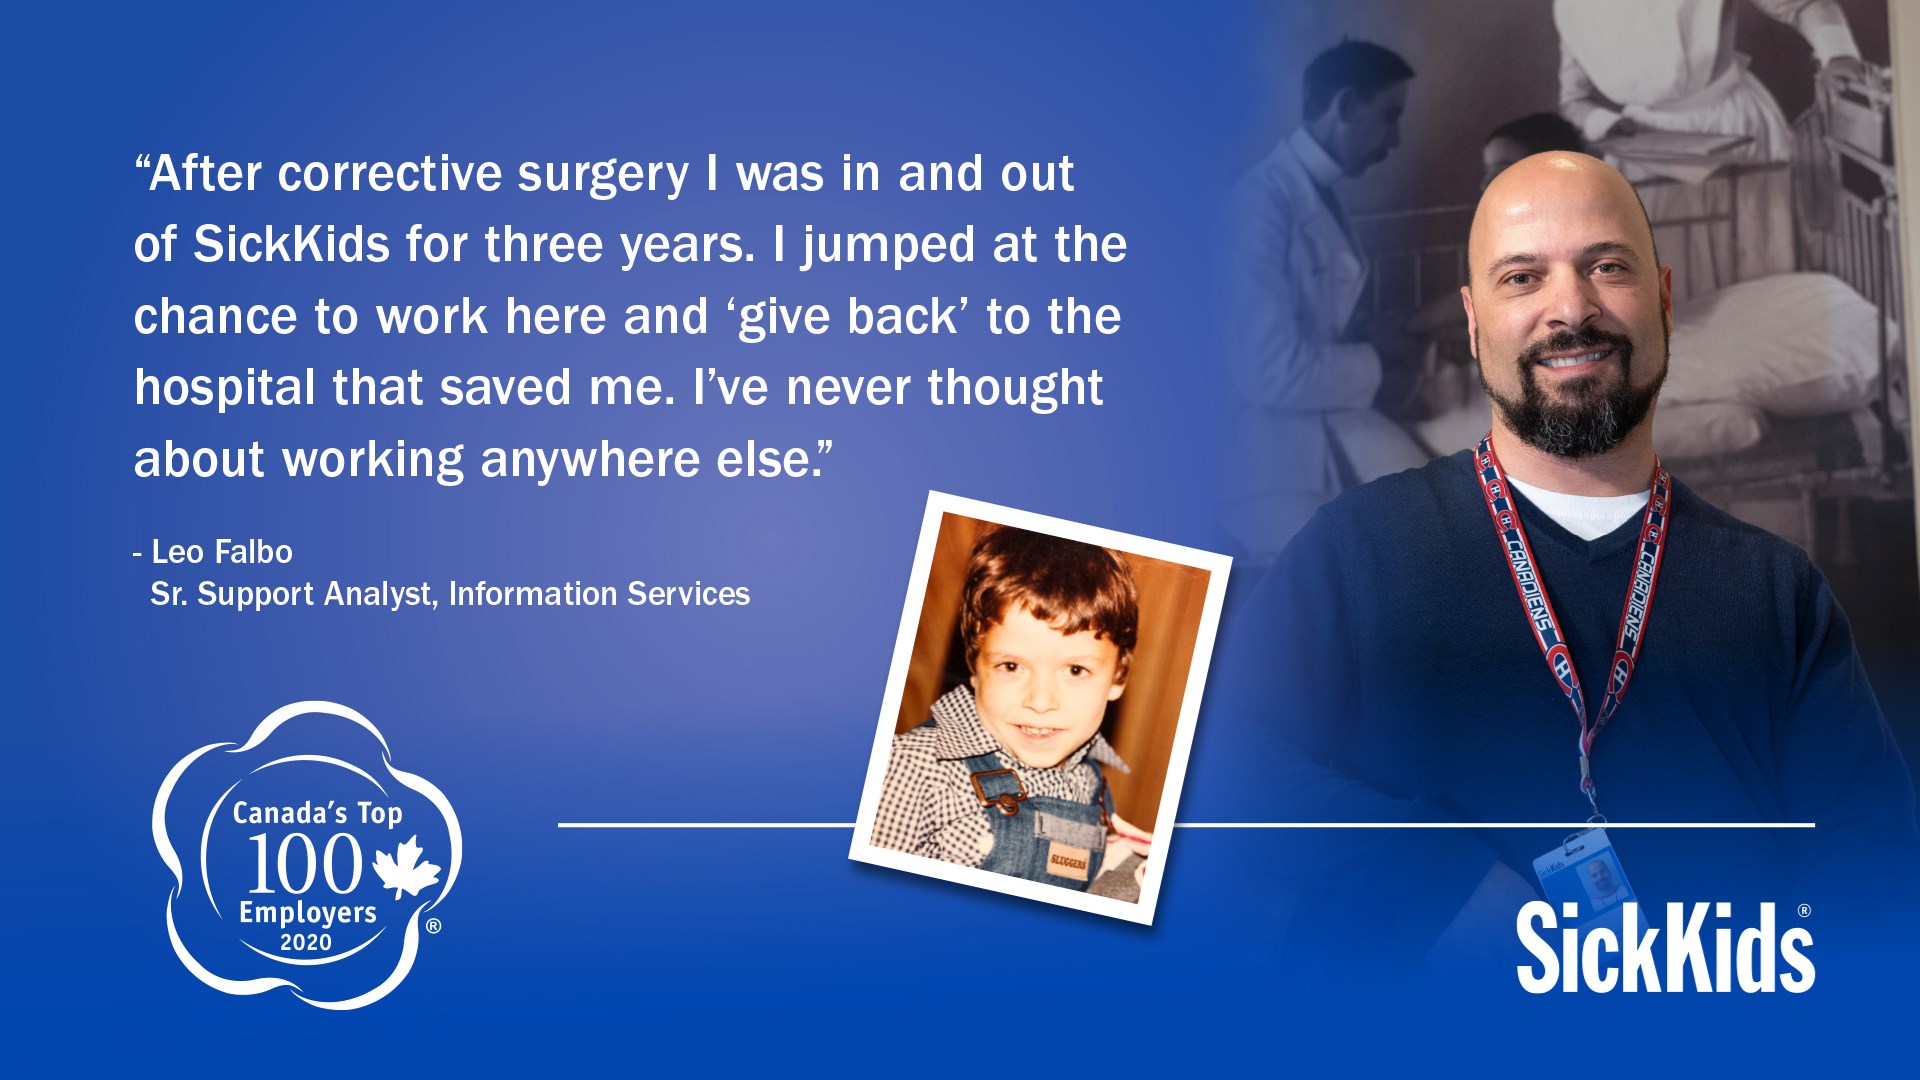 Leo Falbo as a child and as a SickKids staff now. Quote says "After corrective surgery I was in and out of SickKids for three years. I jumped at the chance to work here and give back to the hospital that saved me. I've never thought about working anywhere else."